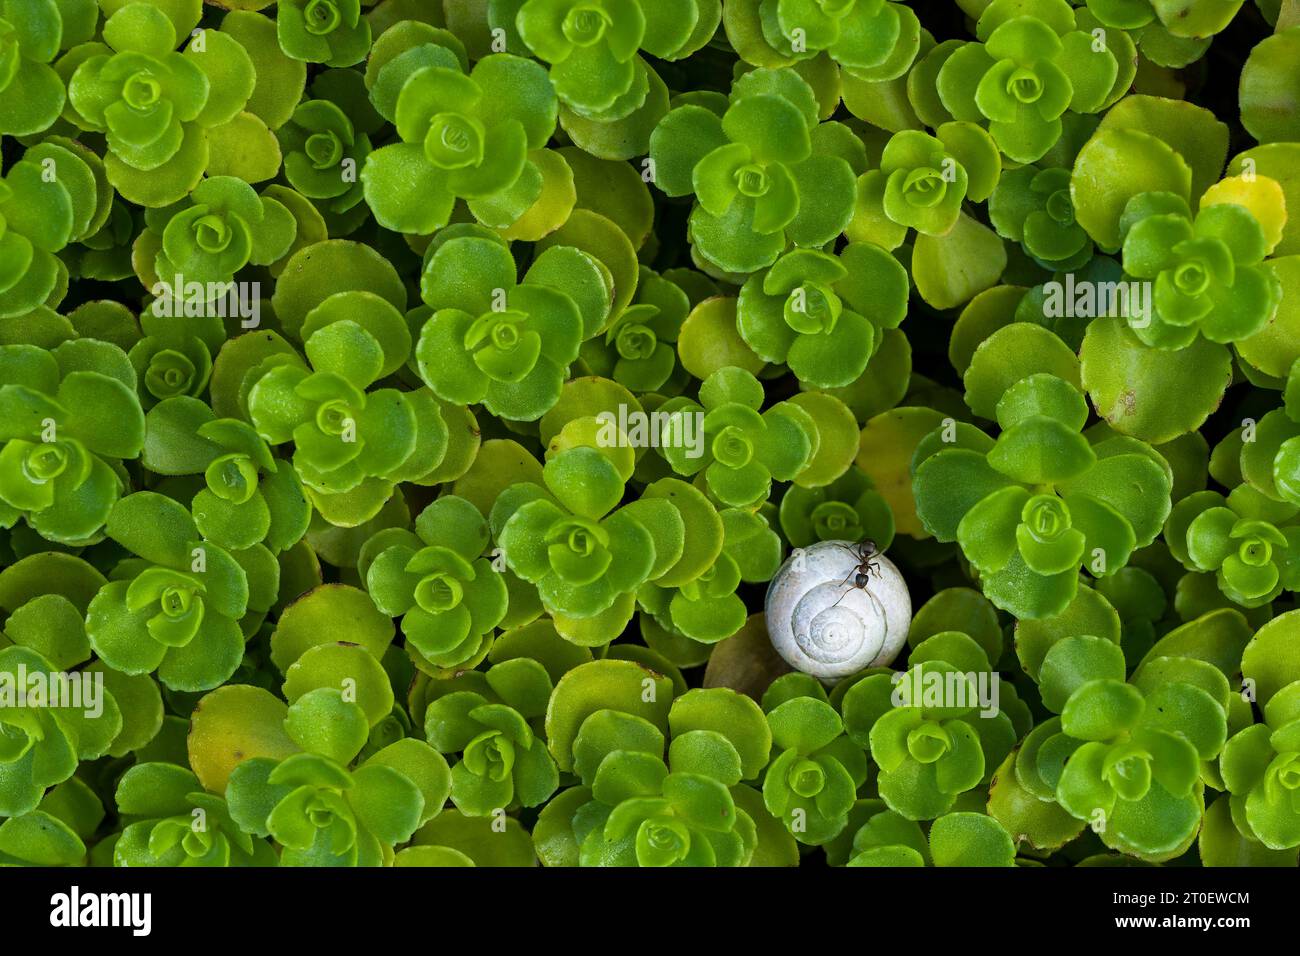 between the rosettes of the carpet fat leaf (Sedum spurium) hides a small snail shell and an ant, top view, Germany Stock Photo